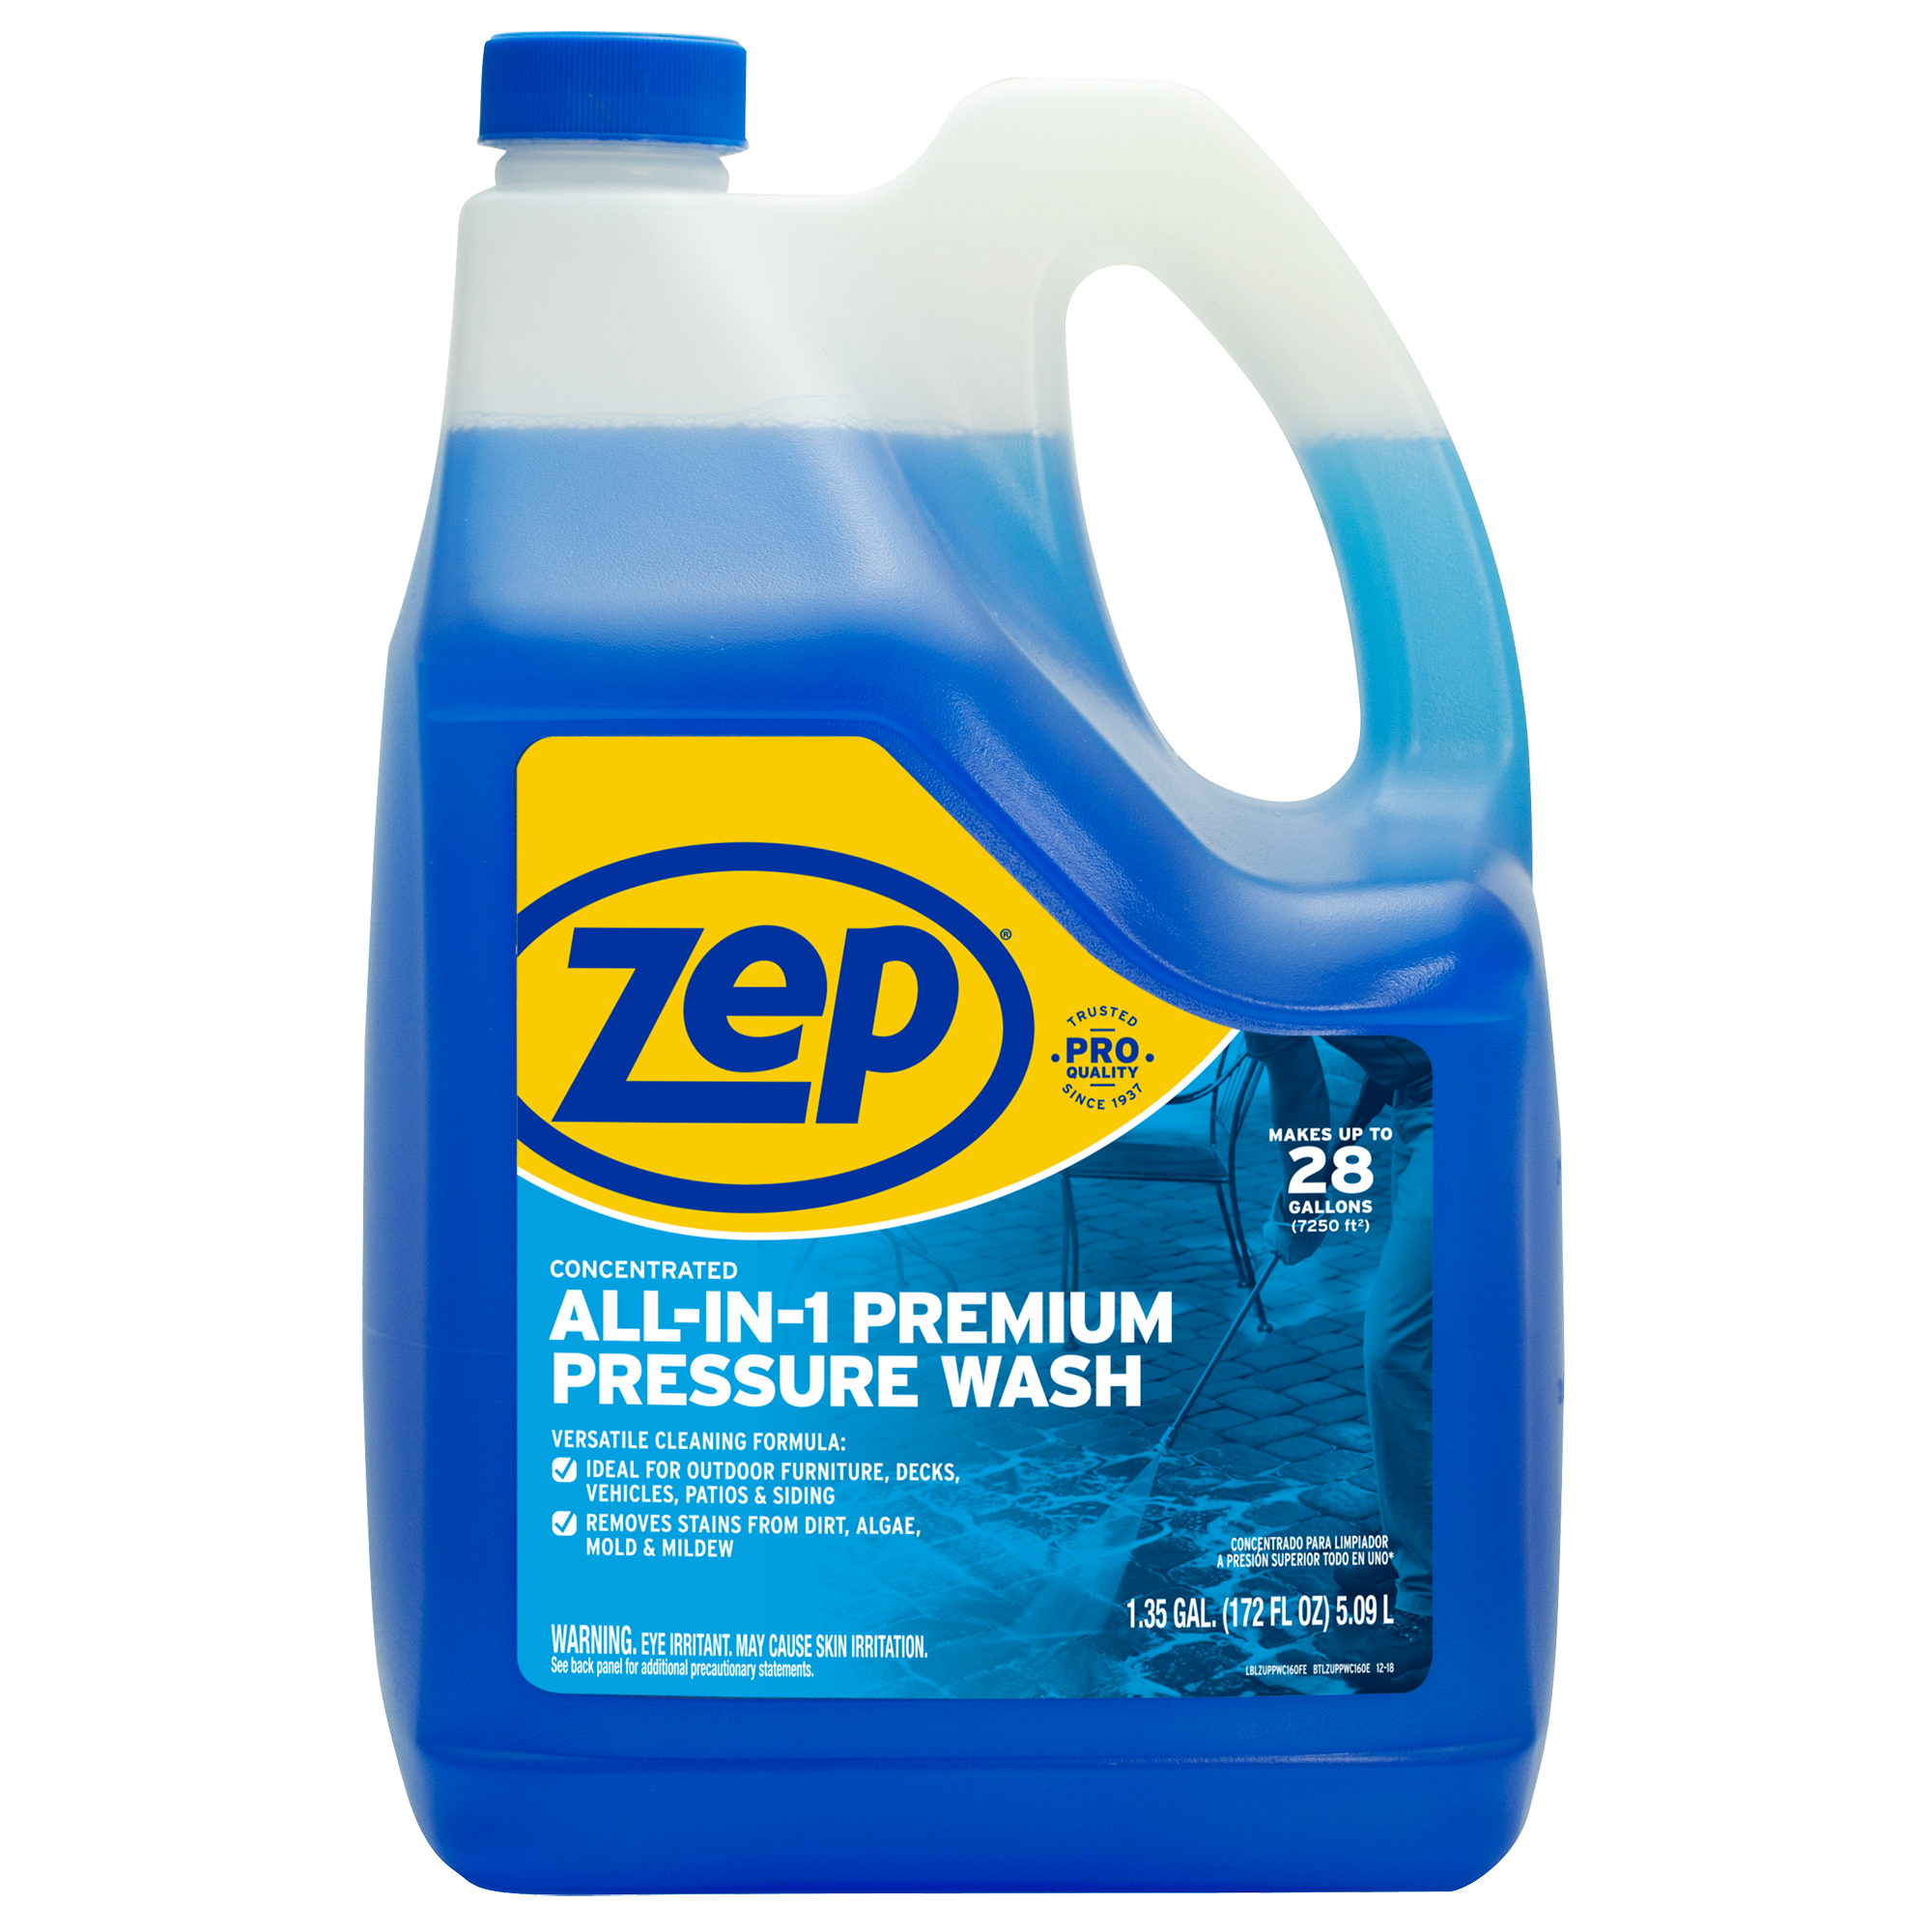 All-in-1 Pressure Wash Cleaner  - 160 oz.